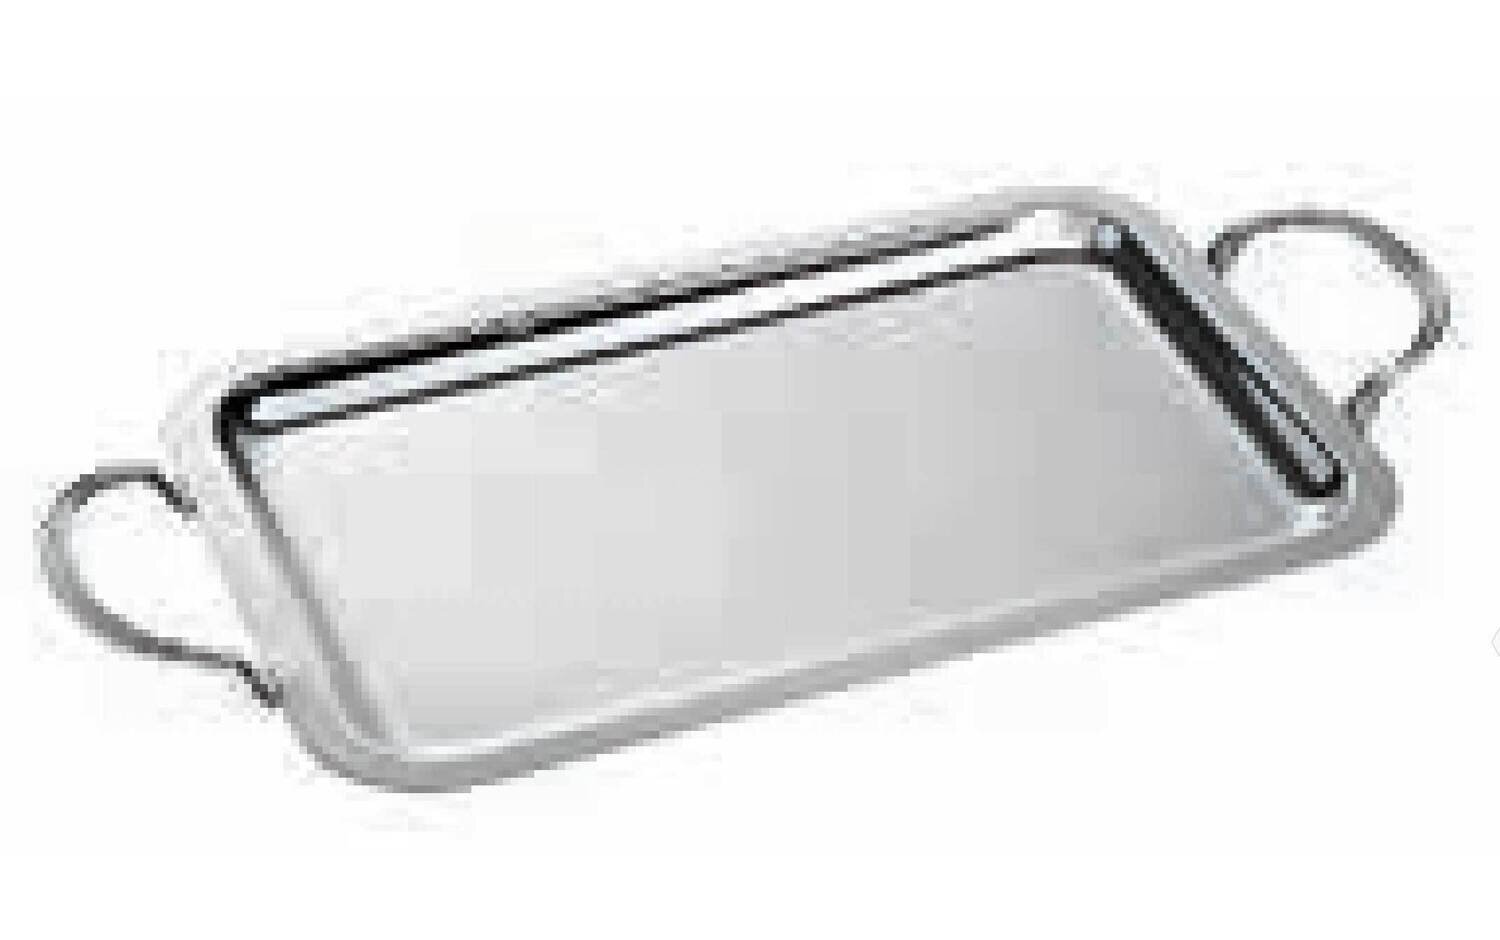 Ercuis Classique Rectangular Serving Tray With Handles 19.625 x 15 Inch Stainless Steel F430450-50